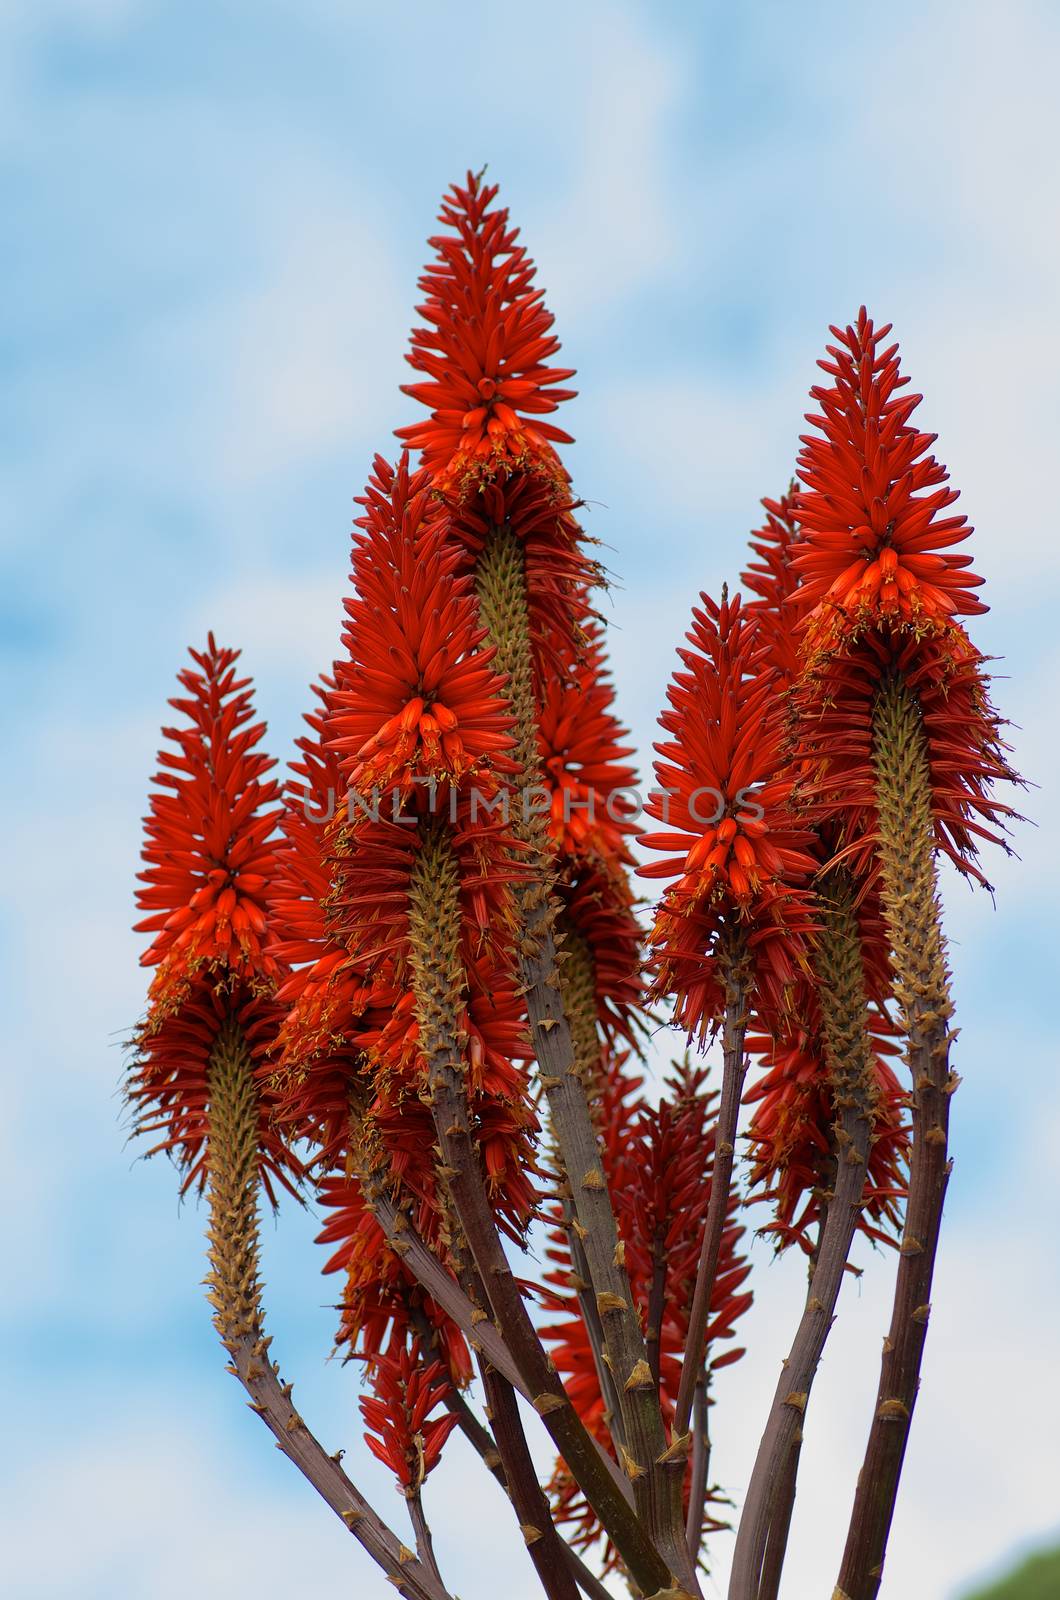 Beauty Red Giant Blooming Aloe Vera on Blue Sky background Outdoors